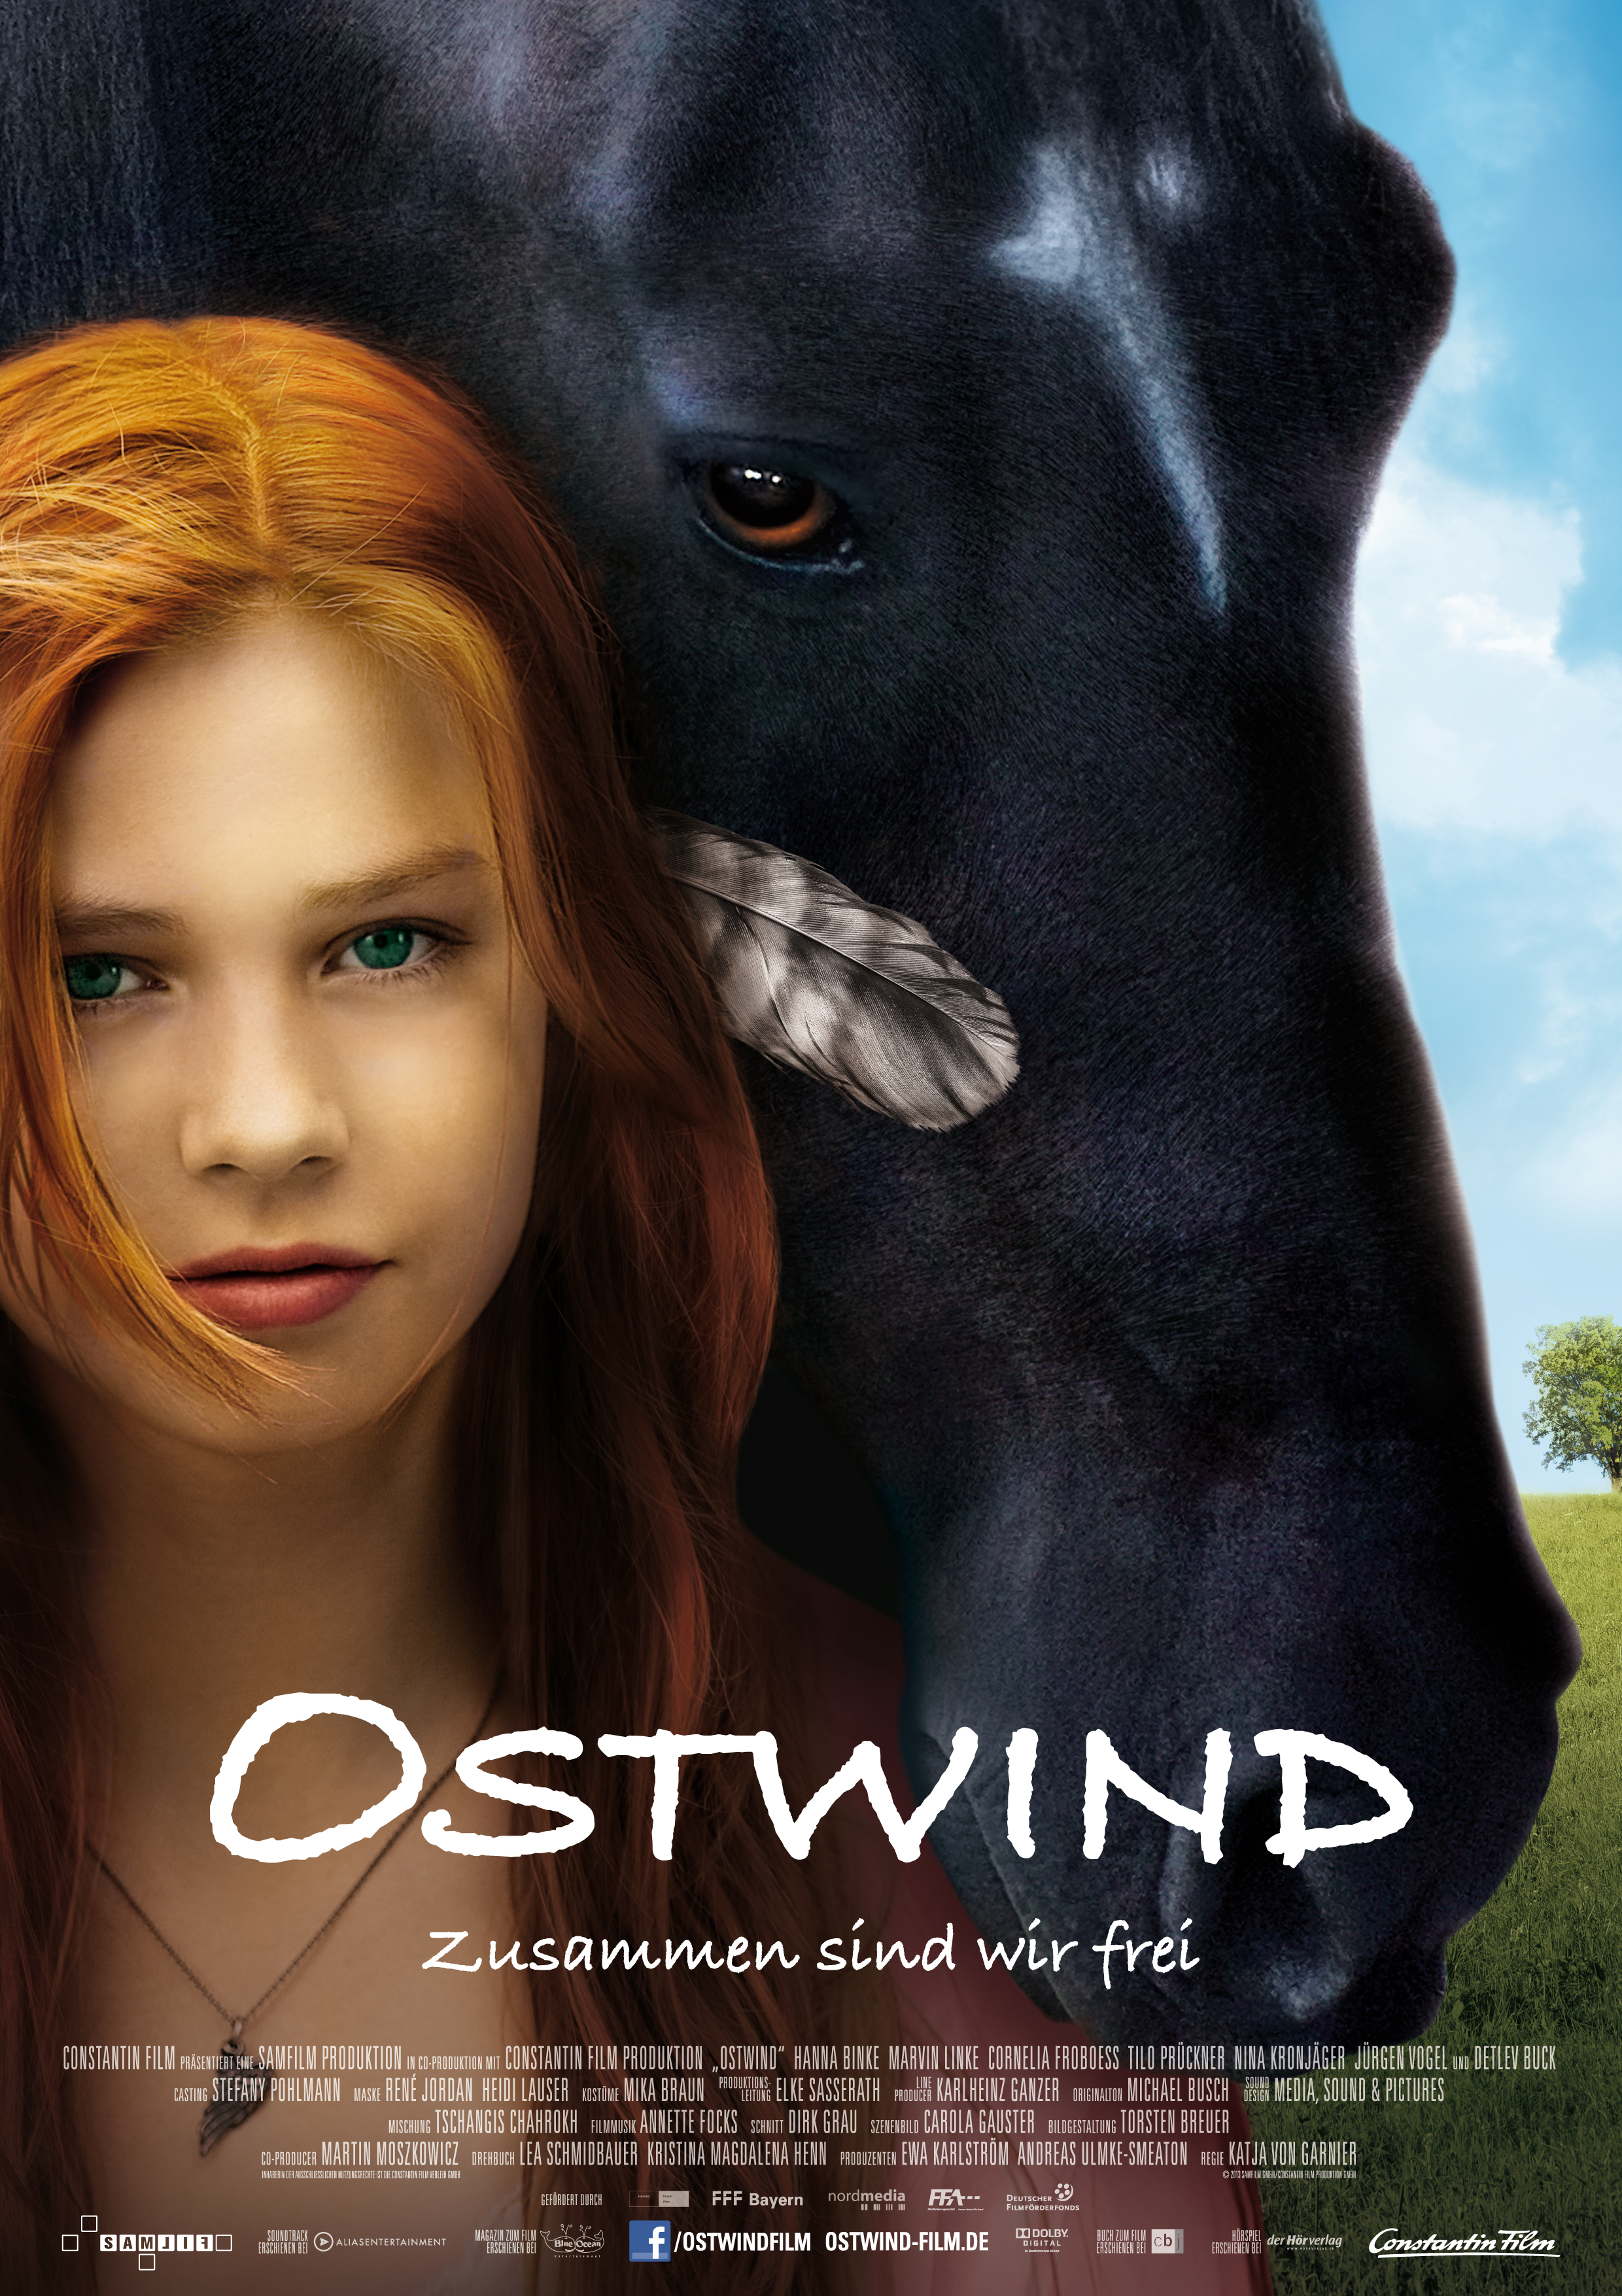 Ostwind (2013) with English Subtitles on DVD on DVD